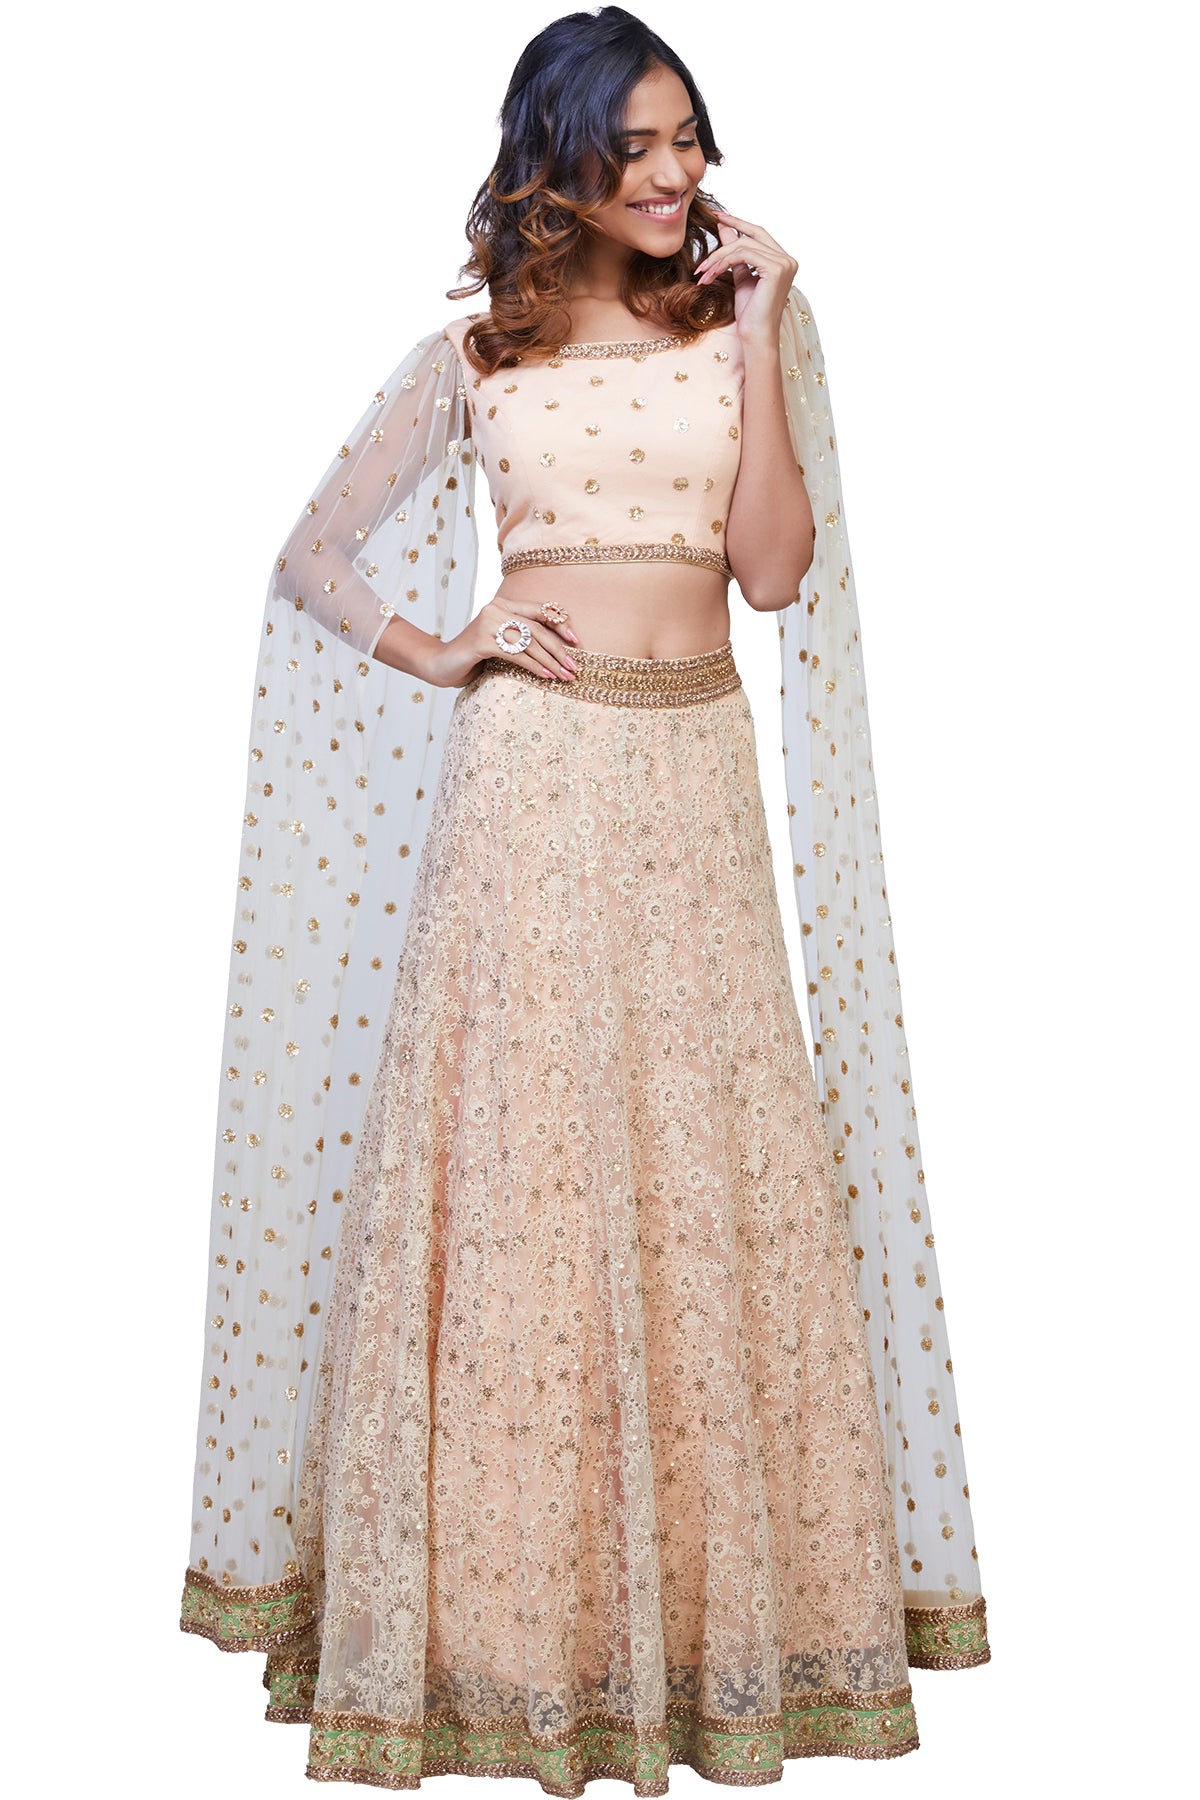 Flutter with finesse in this peach and white net lehenga with thread and sequins embroidery paired with a floor-length cape sleeves blouse.